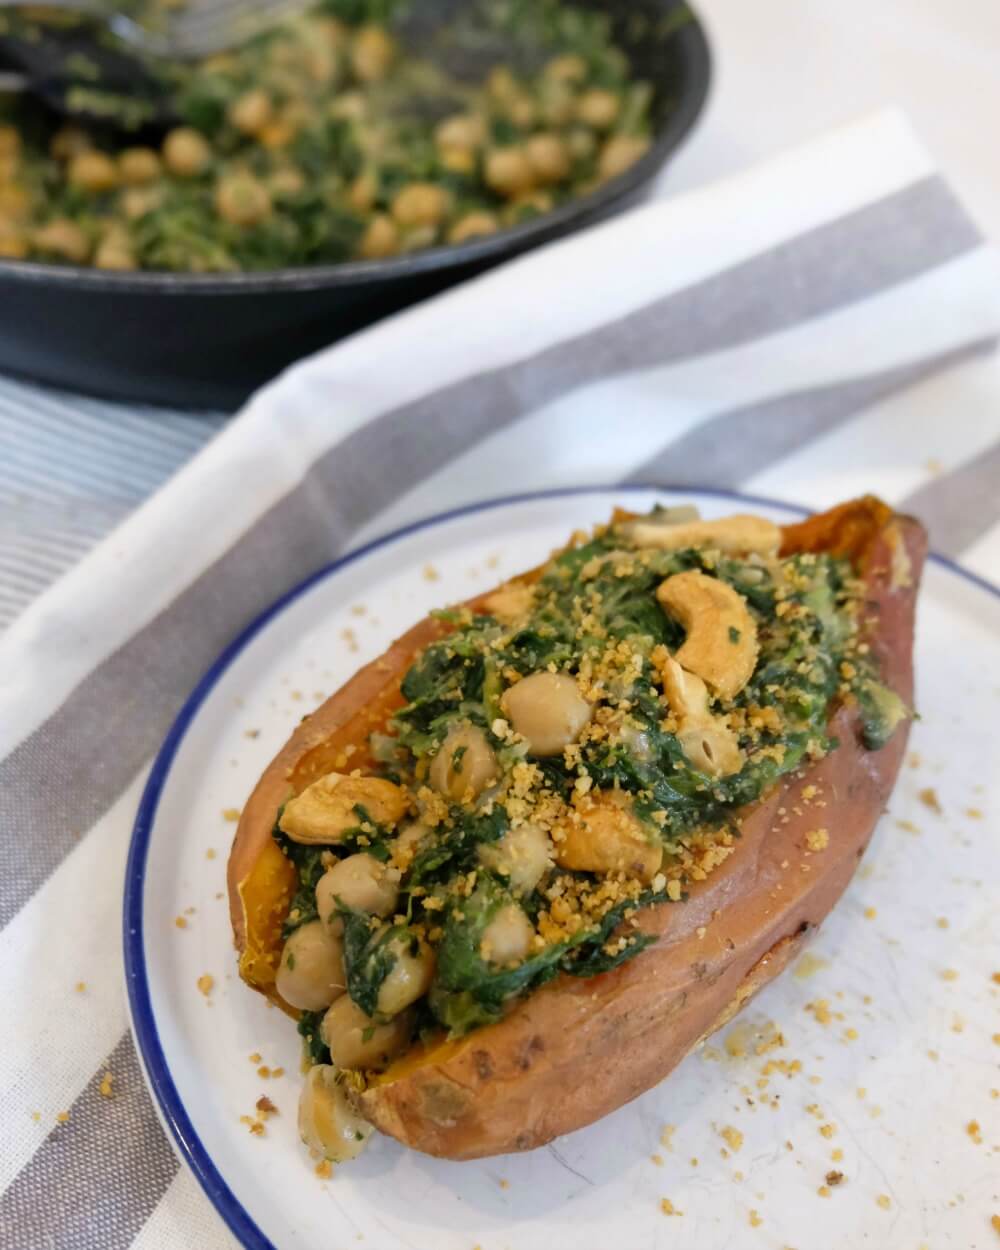 Vegan winter recipes Roasted sweet potatoes with curried spinach and chickpeas CREDIT @marinola